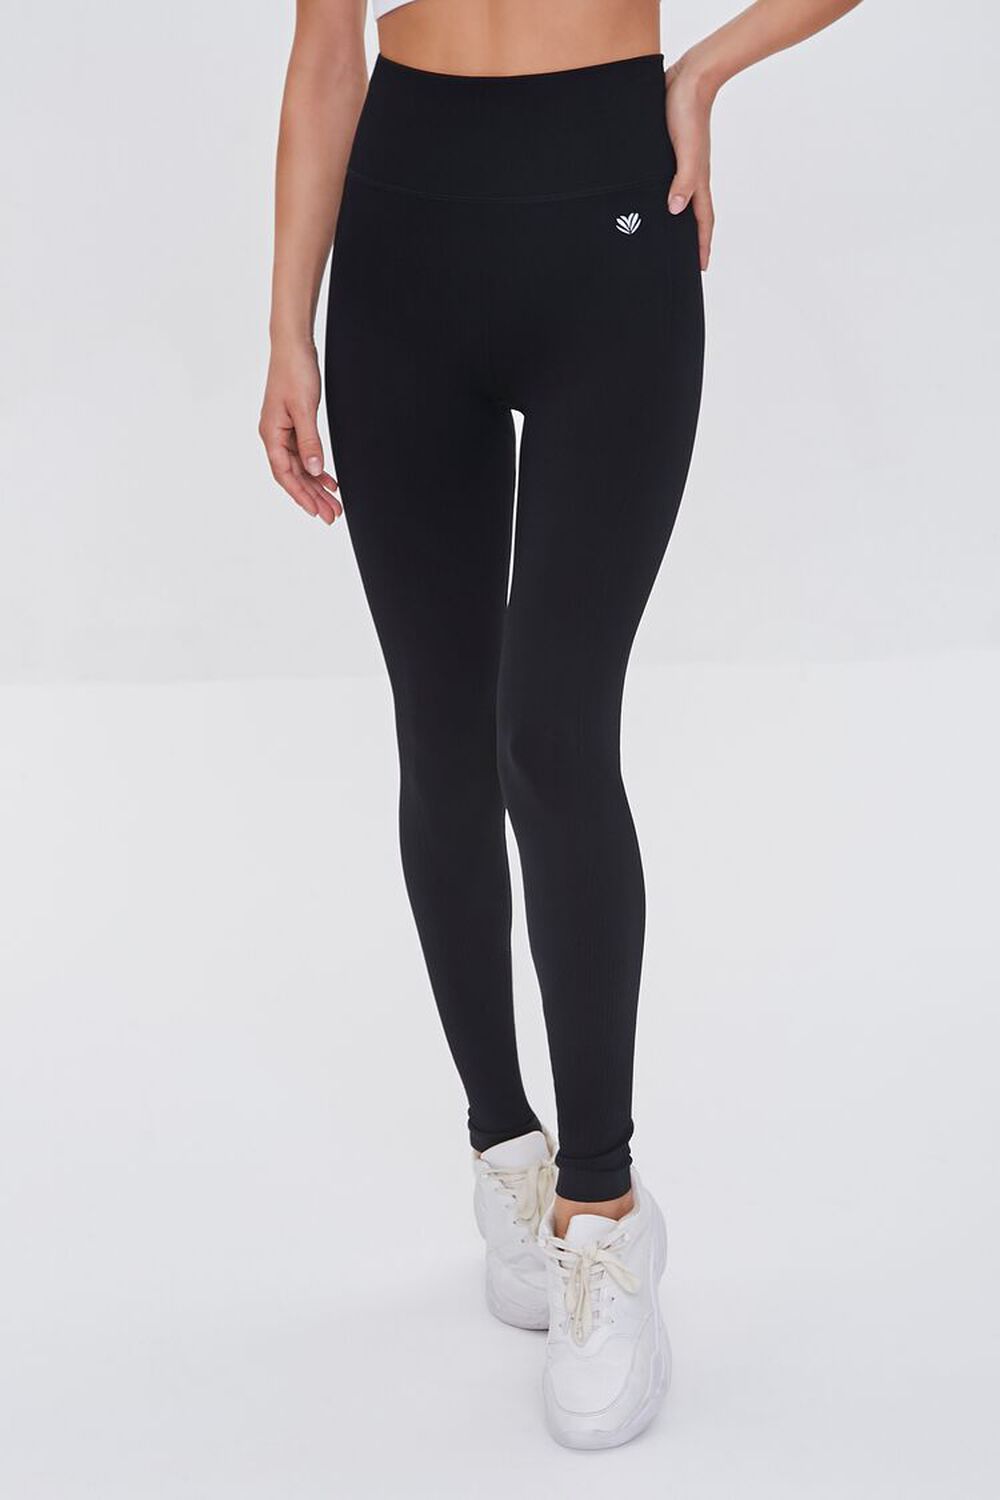 Highwaisted athletic Leggings with 30% discount!